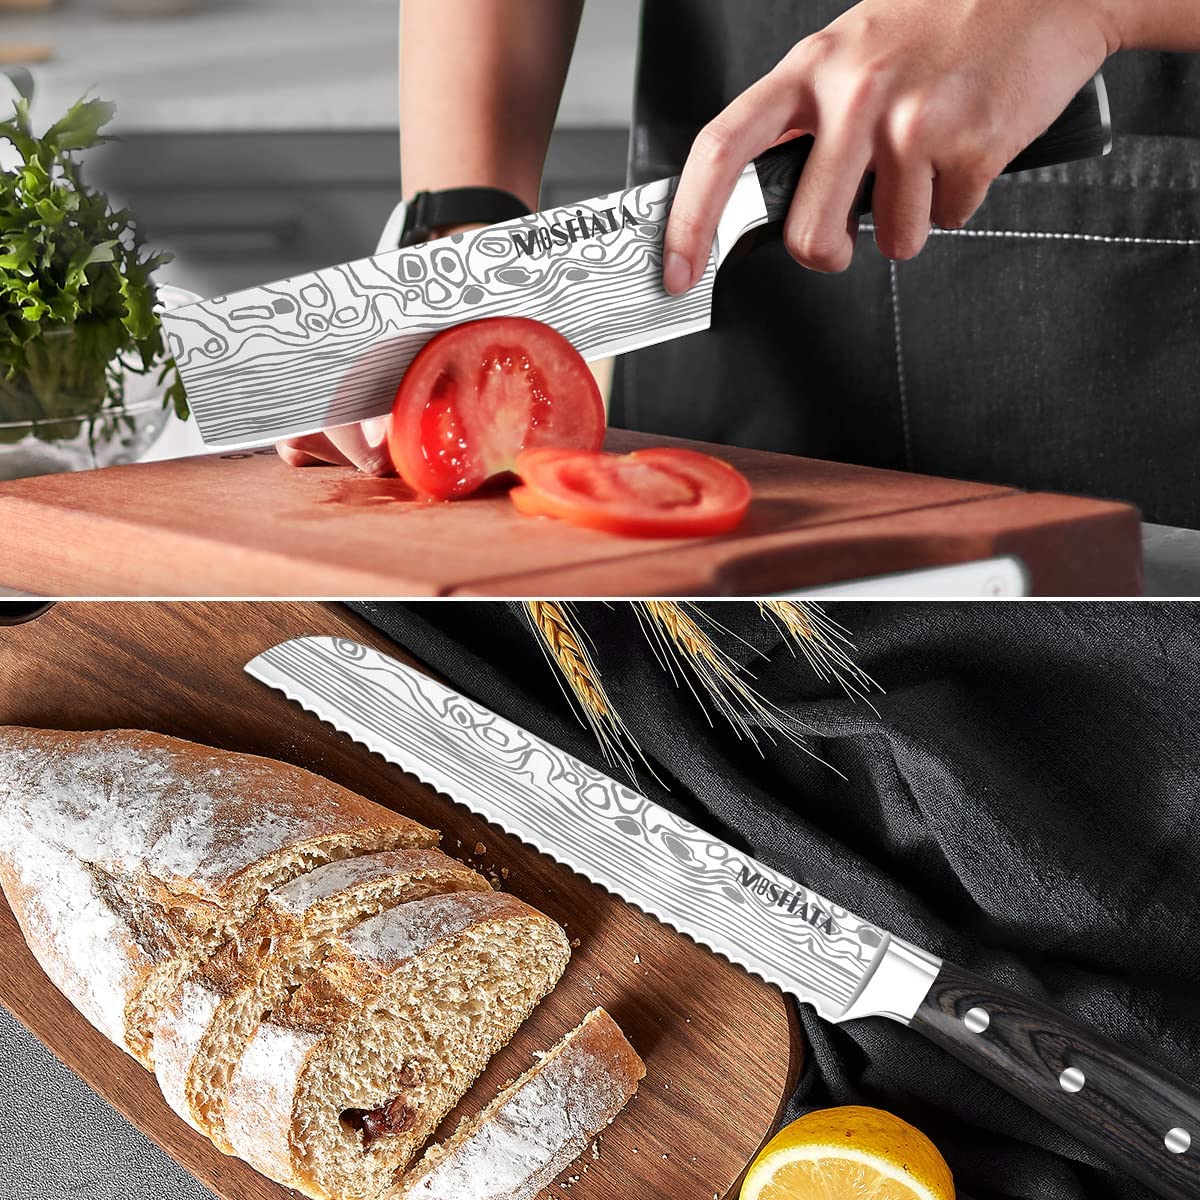 MOSFiATA Chef Knife, Ultra Sharp Kitchen Knife 8 inch, Premier High Carbon  German EN1. 4116 Stainless Steel, Full Tang Blade Pro Chopping Cooking Knife  with Knife Sharpener Finger Blade Guard Gift Box